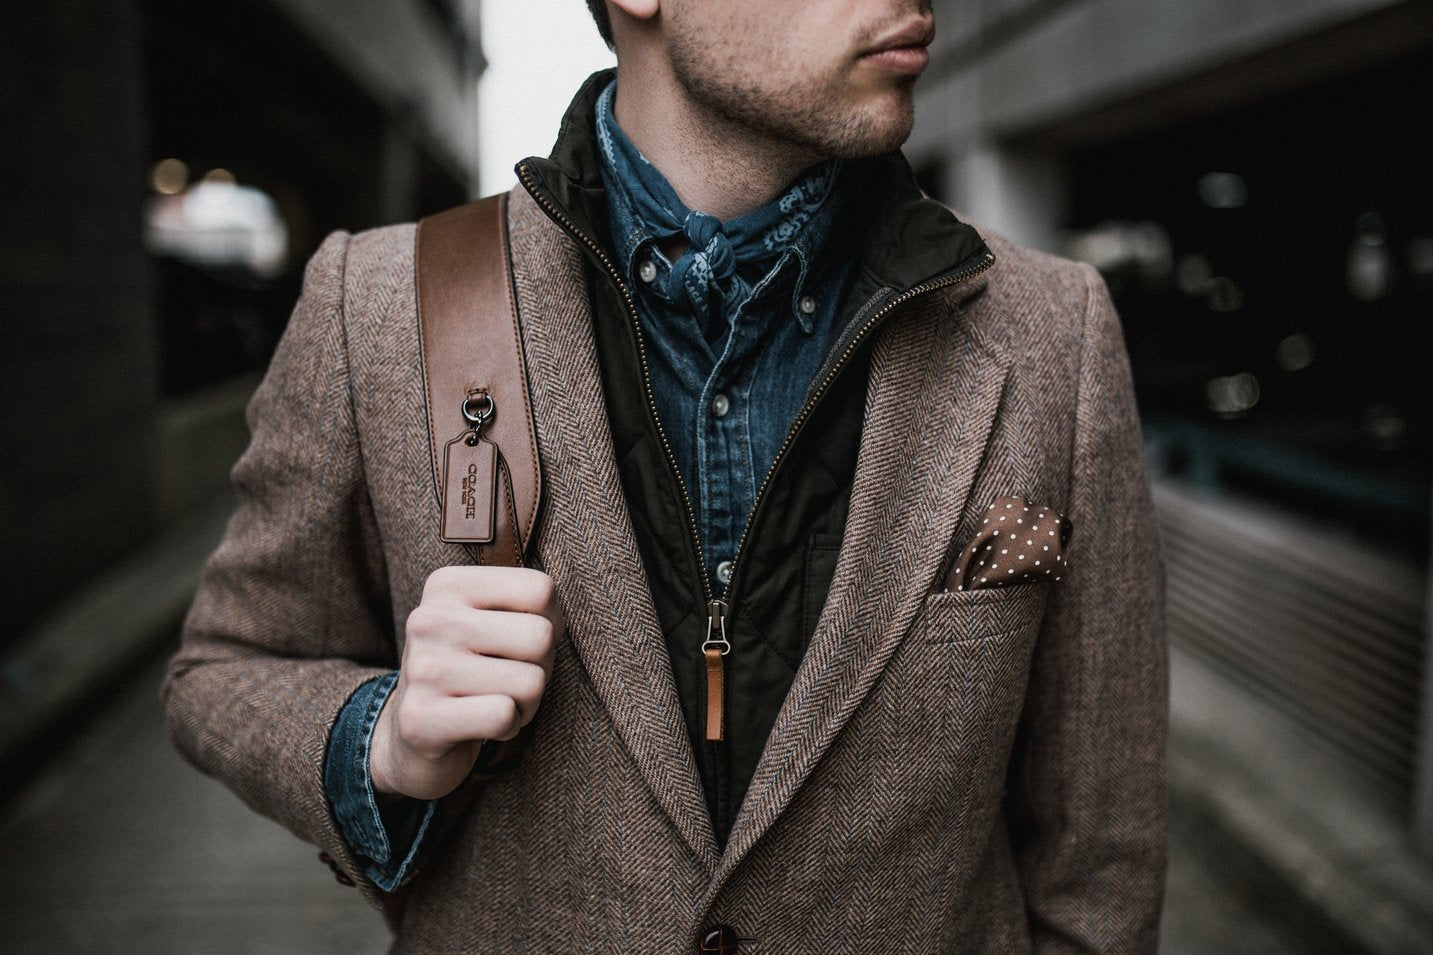  stylish man in a  business casual outfit  accessorizing with a modern pocket square, bandana, and leather backpack